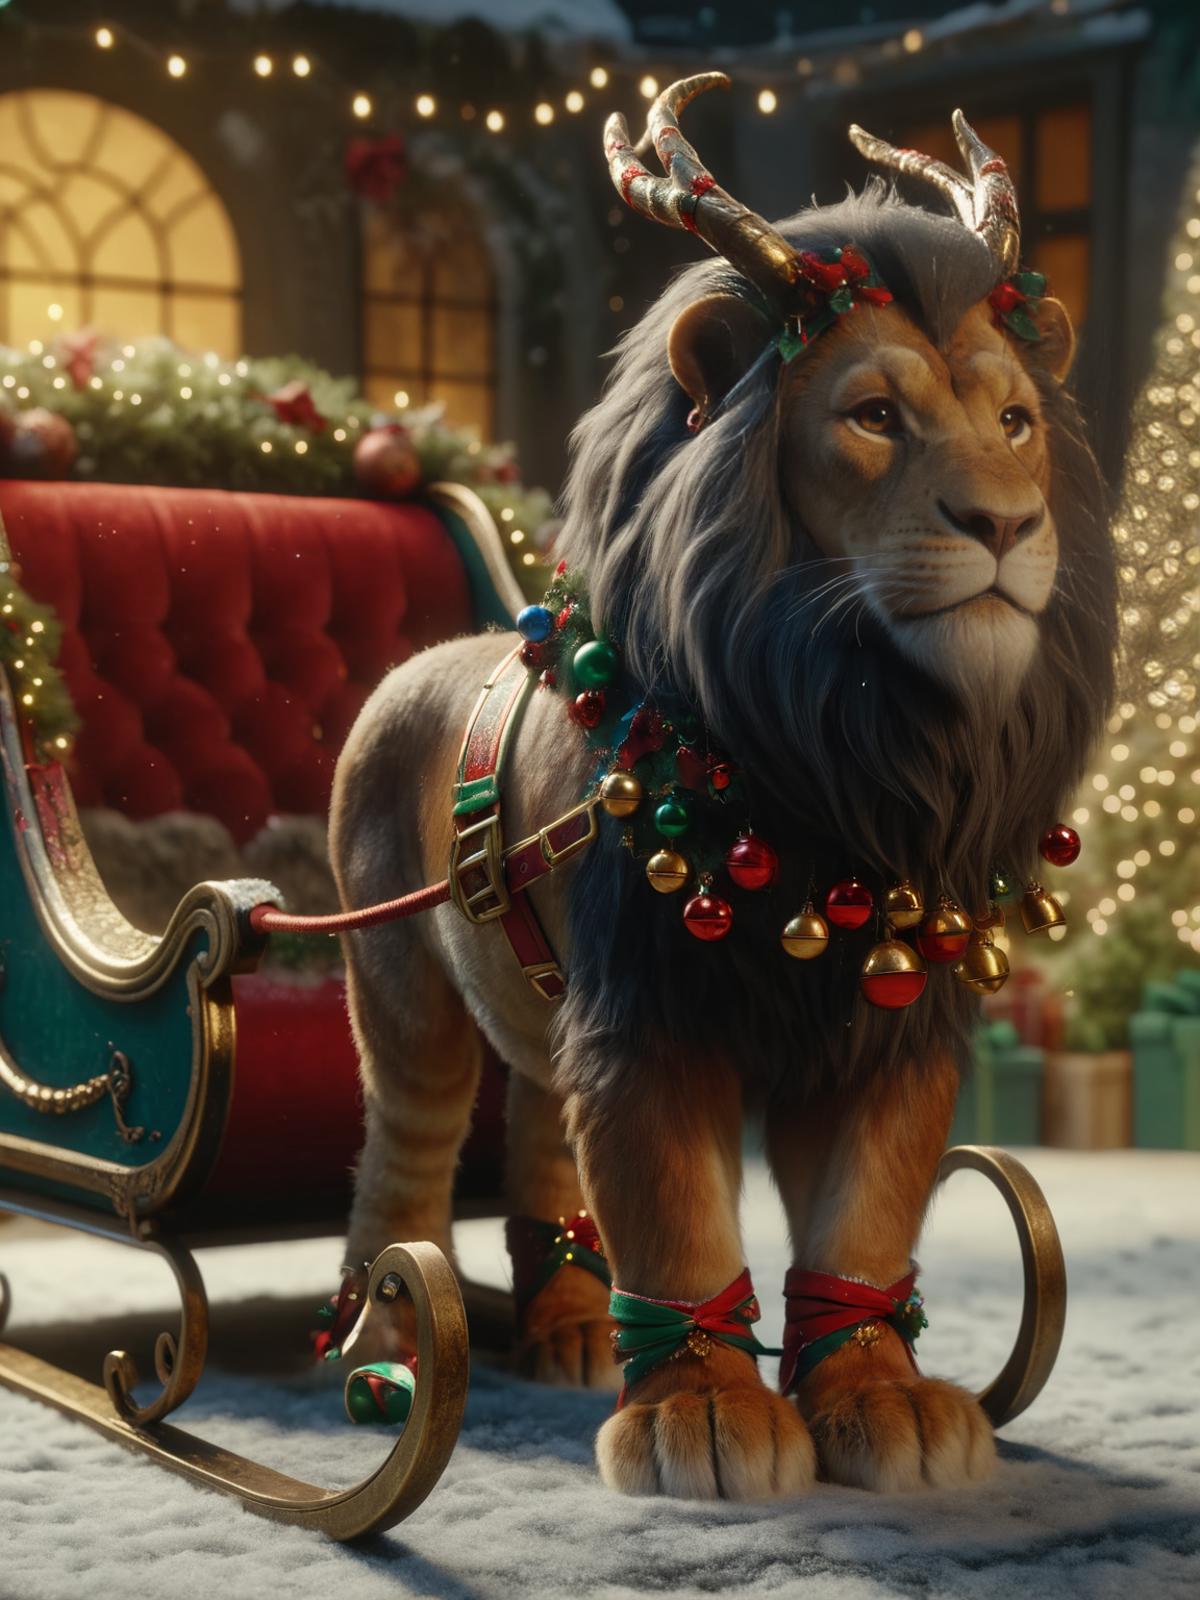 A Lion in a Sleigh with Christmas Decorations